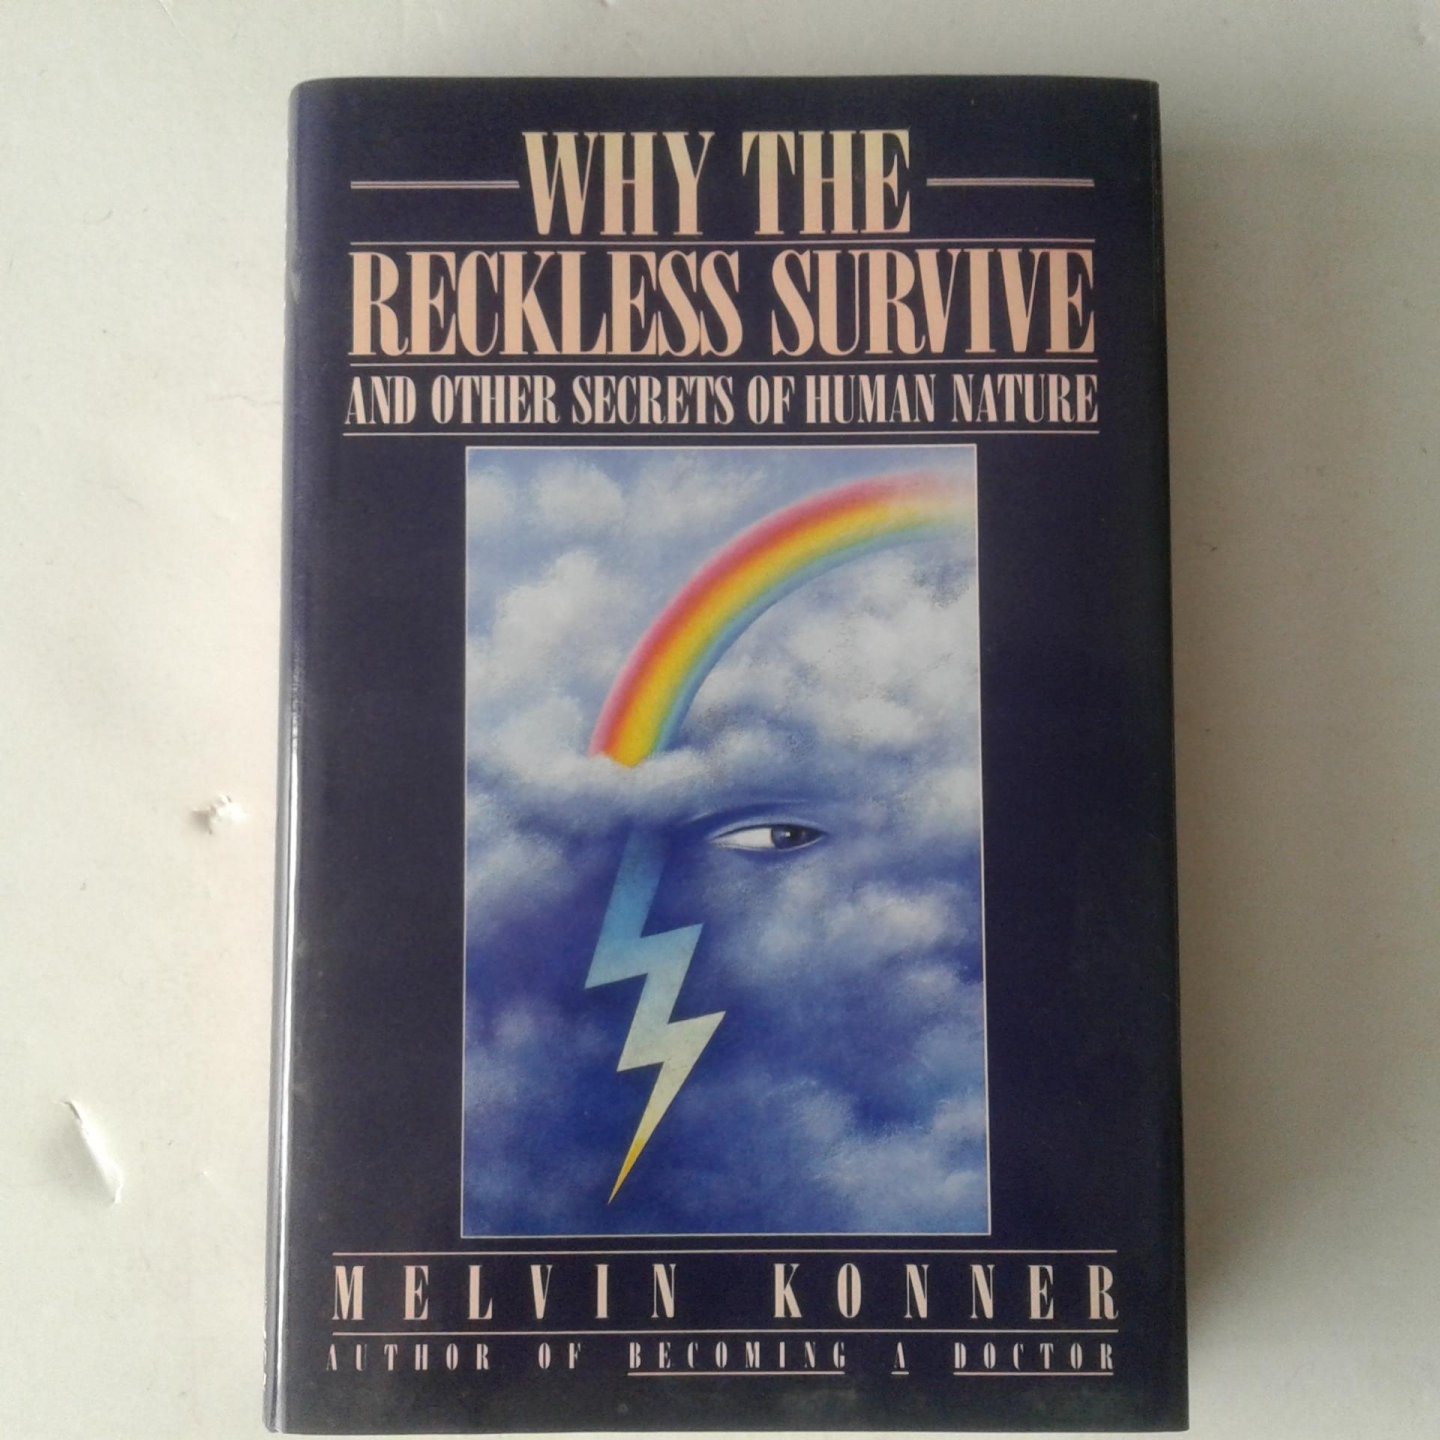 Konner, Melvin - Why the Reckless Survive and Other Secrets of Human Nature